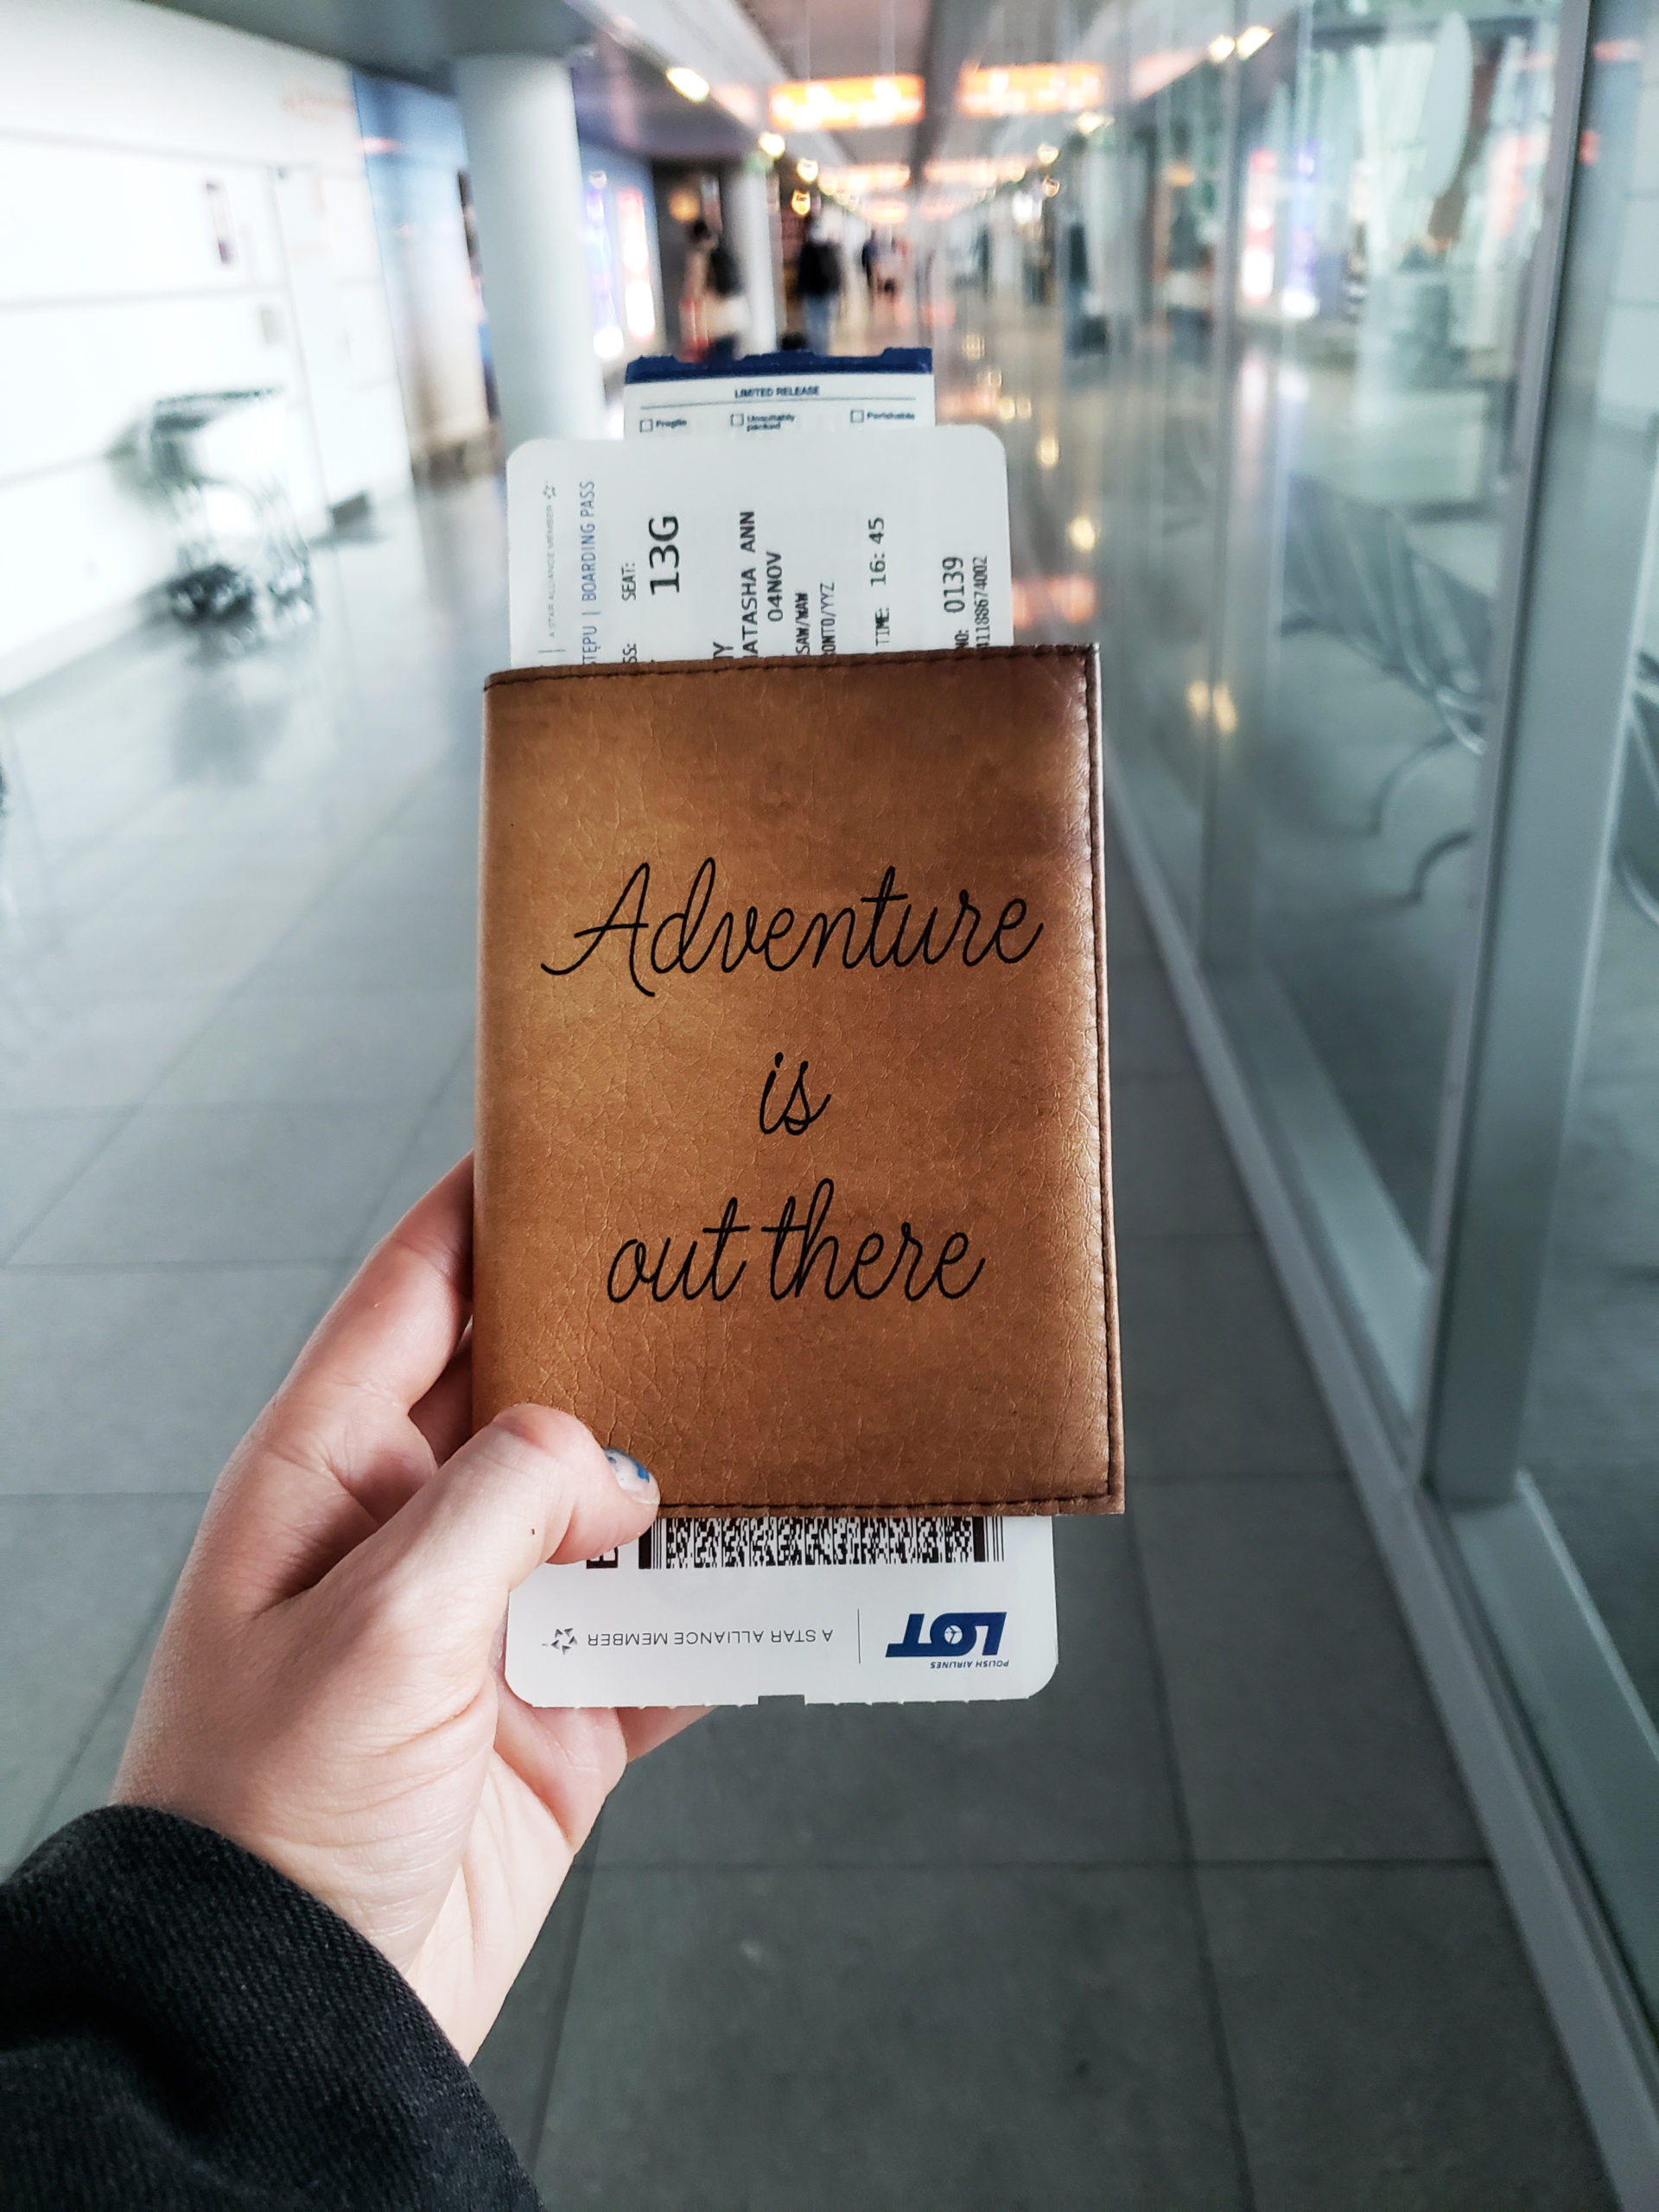 Travelling Internationally During Covid-19: My Experience & What To Expect